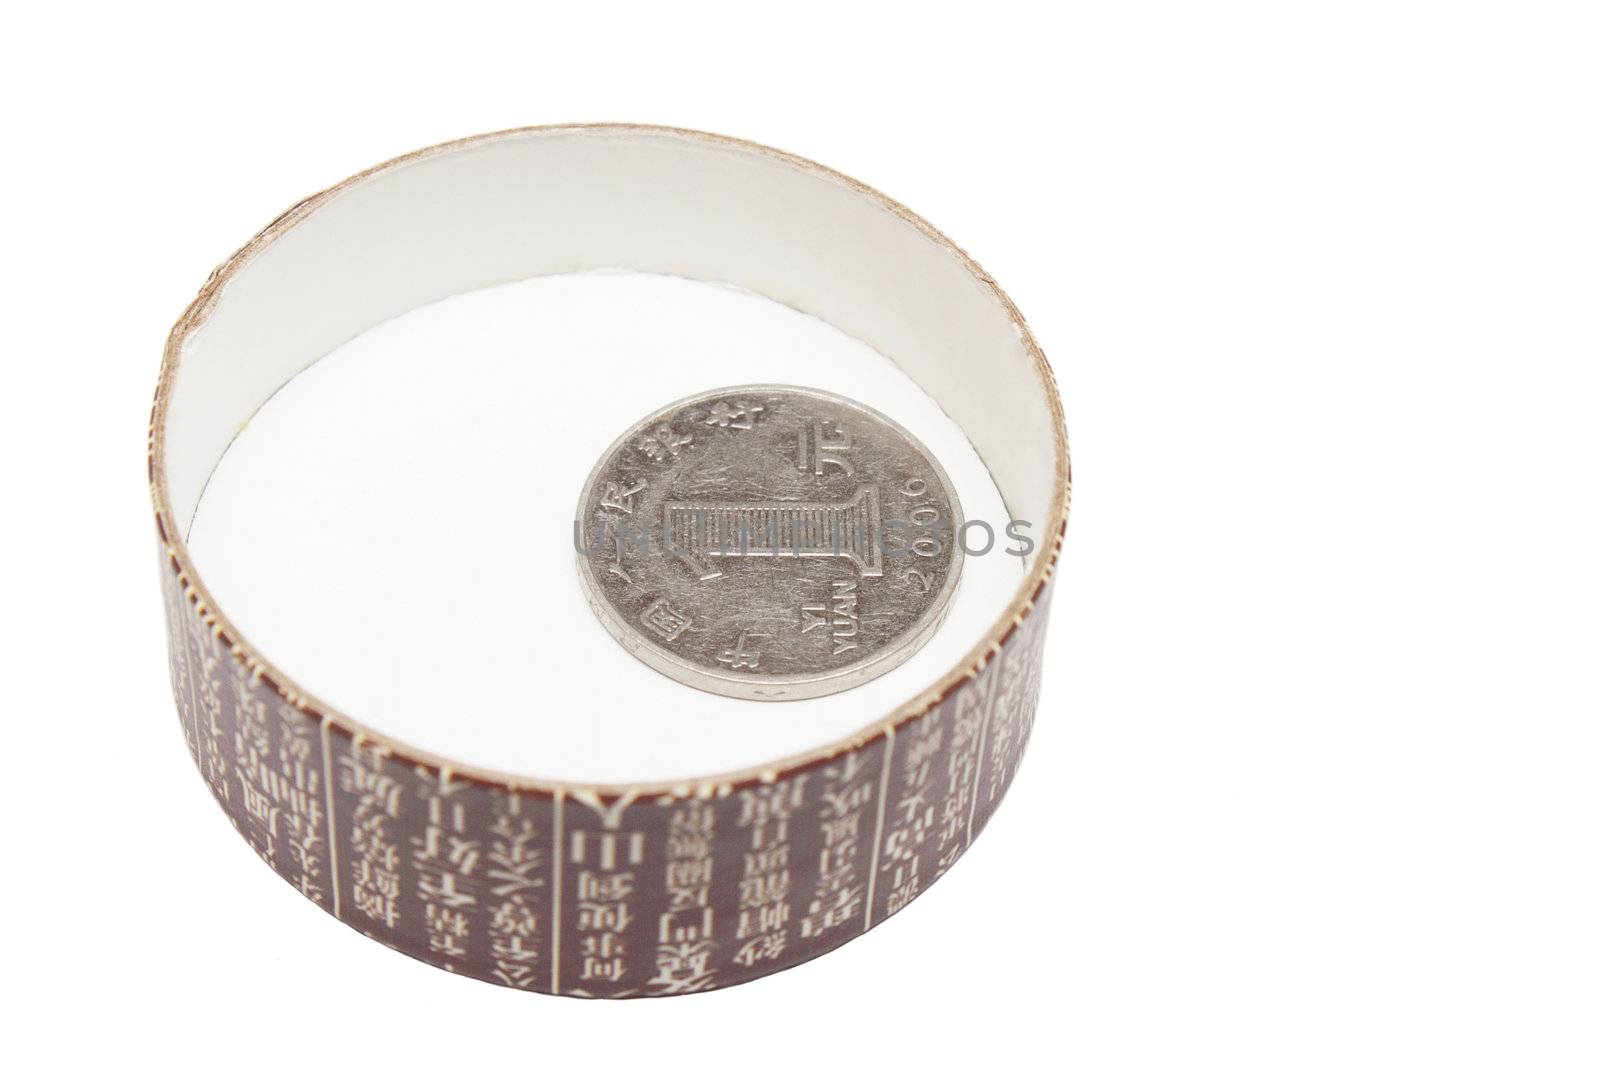 Single one yi yuan coin in the tea box cap isolated on white background